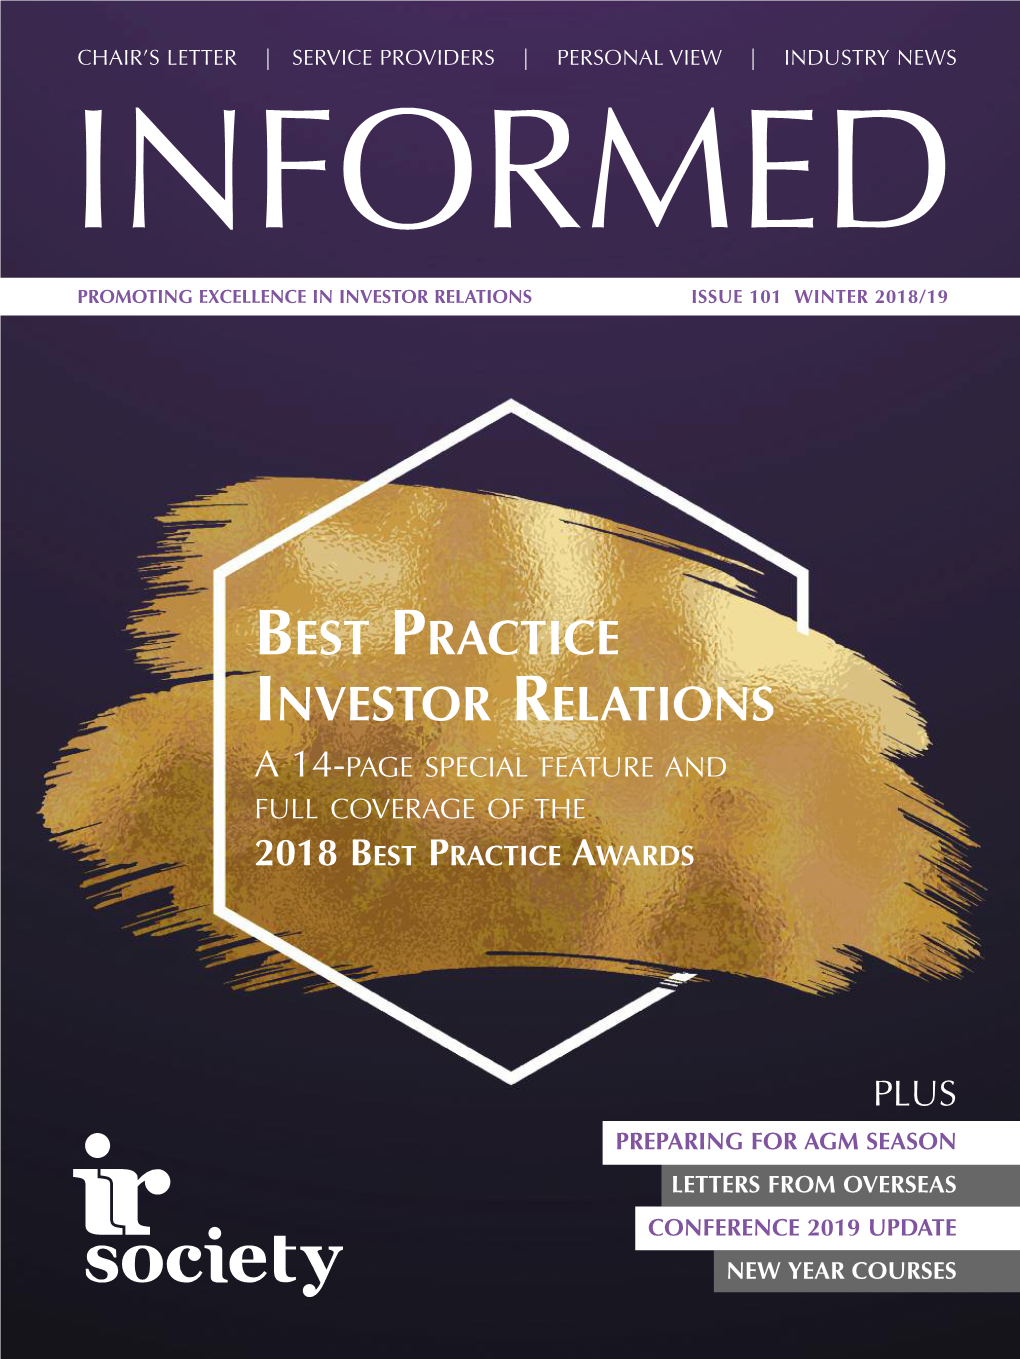 Best Practice Investor Relations a 14-Page Special Feature and Full Coverage of the 2018 Best Practice Awards